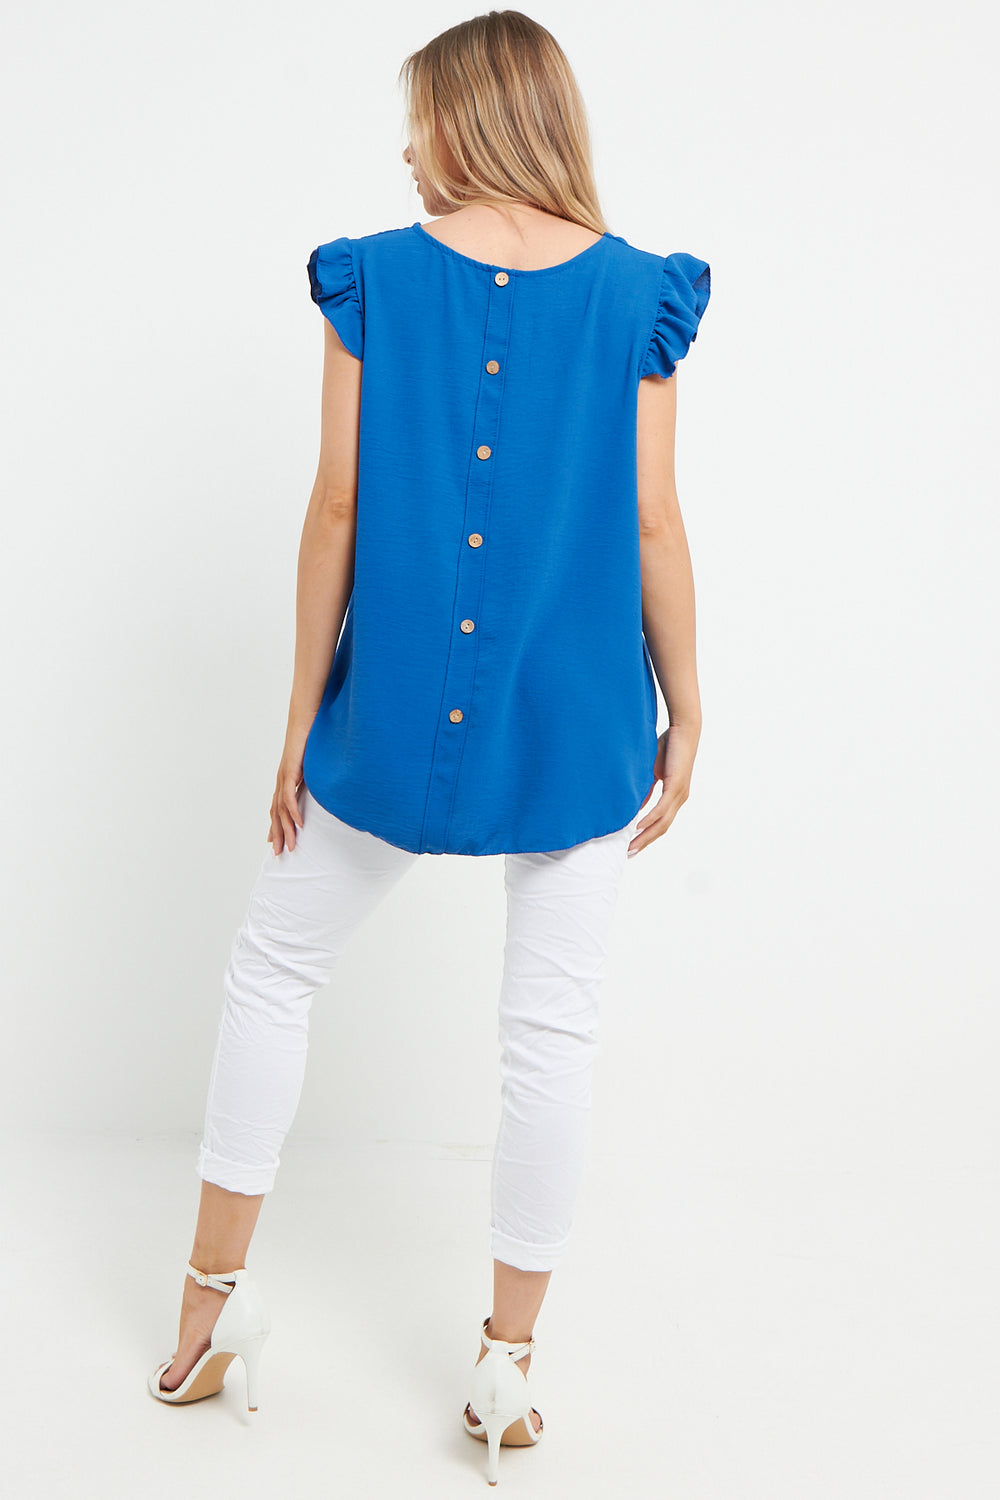 BUTTON BACK DETAILED TOP (8013609107704)